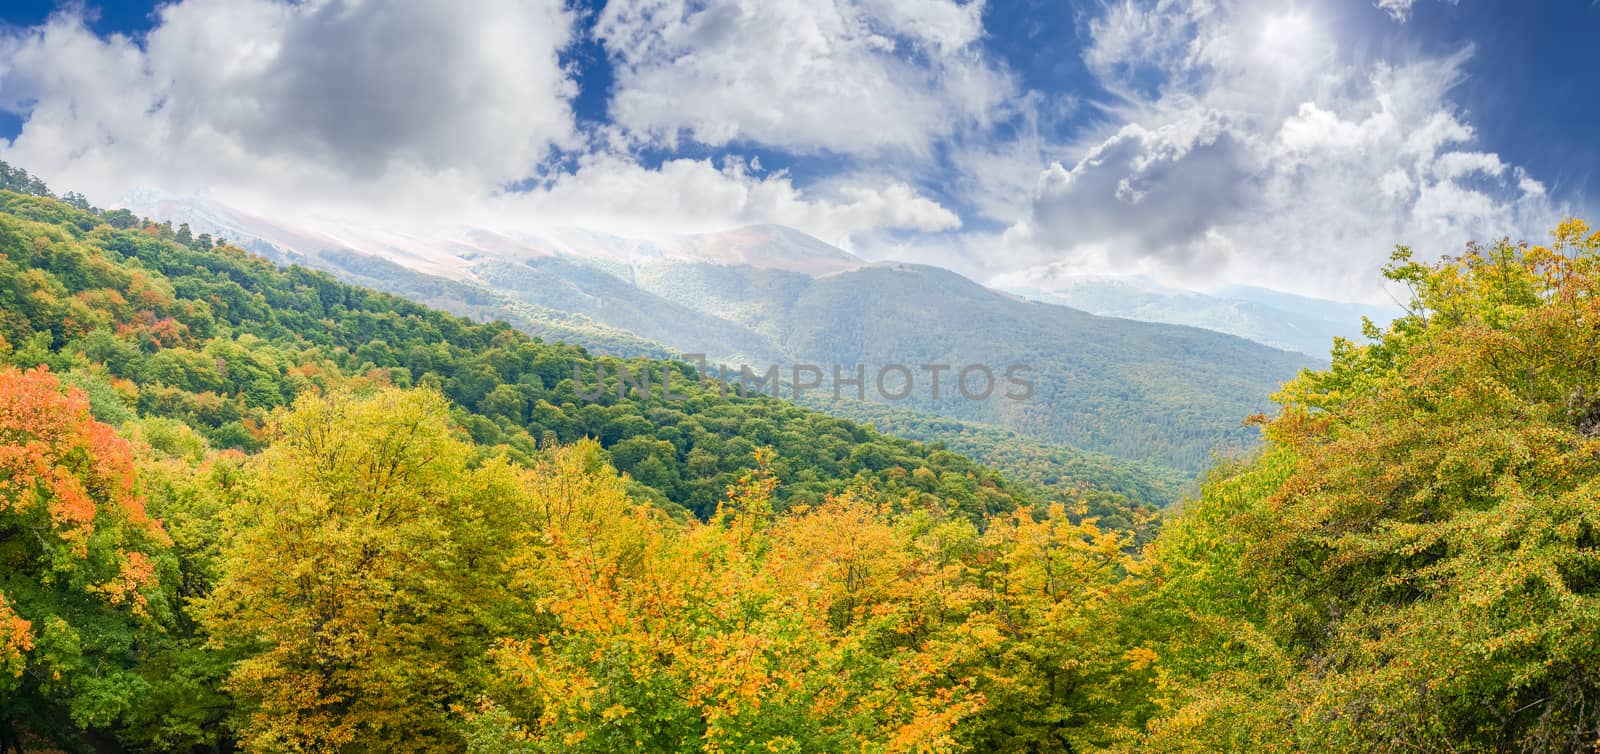 Panorama of the hillside with forest on a foreground by anmbph